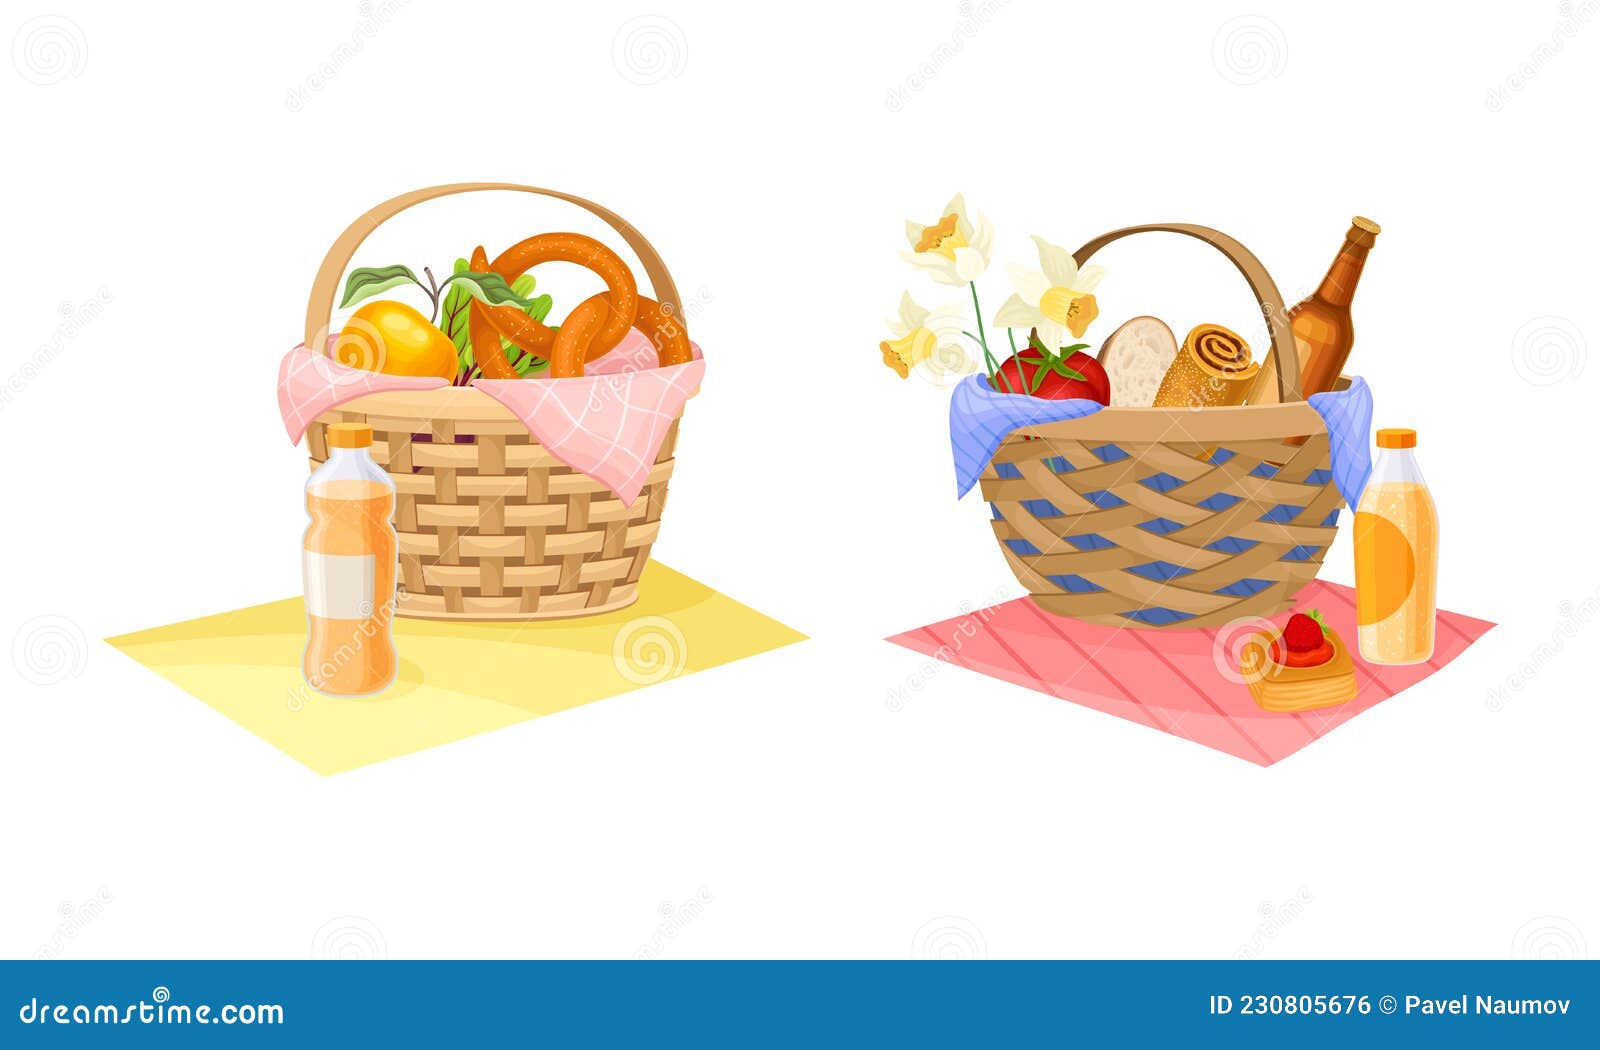 Picnic Baskets Full of Food and Drinks Set. Wicker Hampers with ...